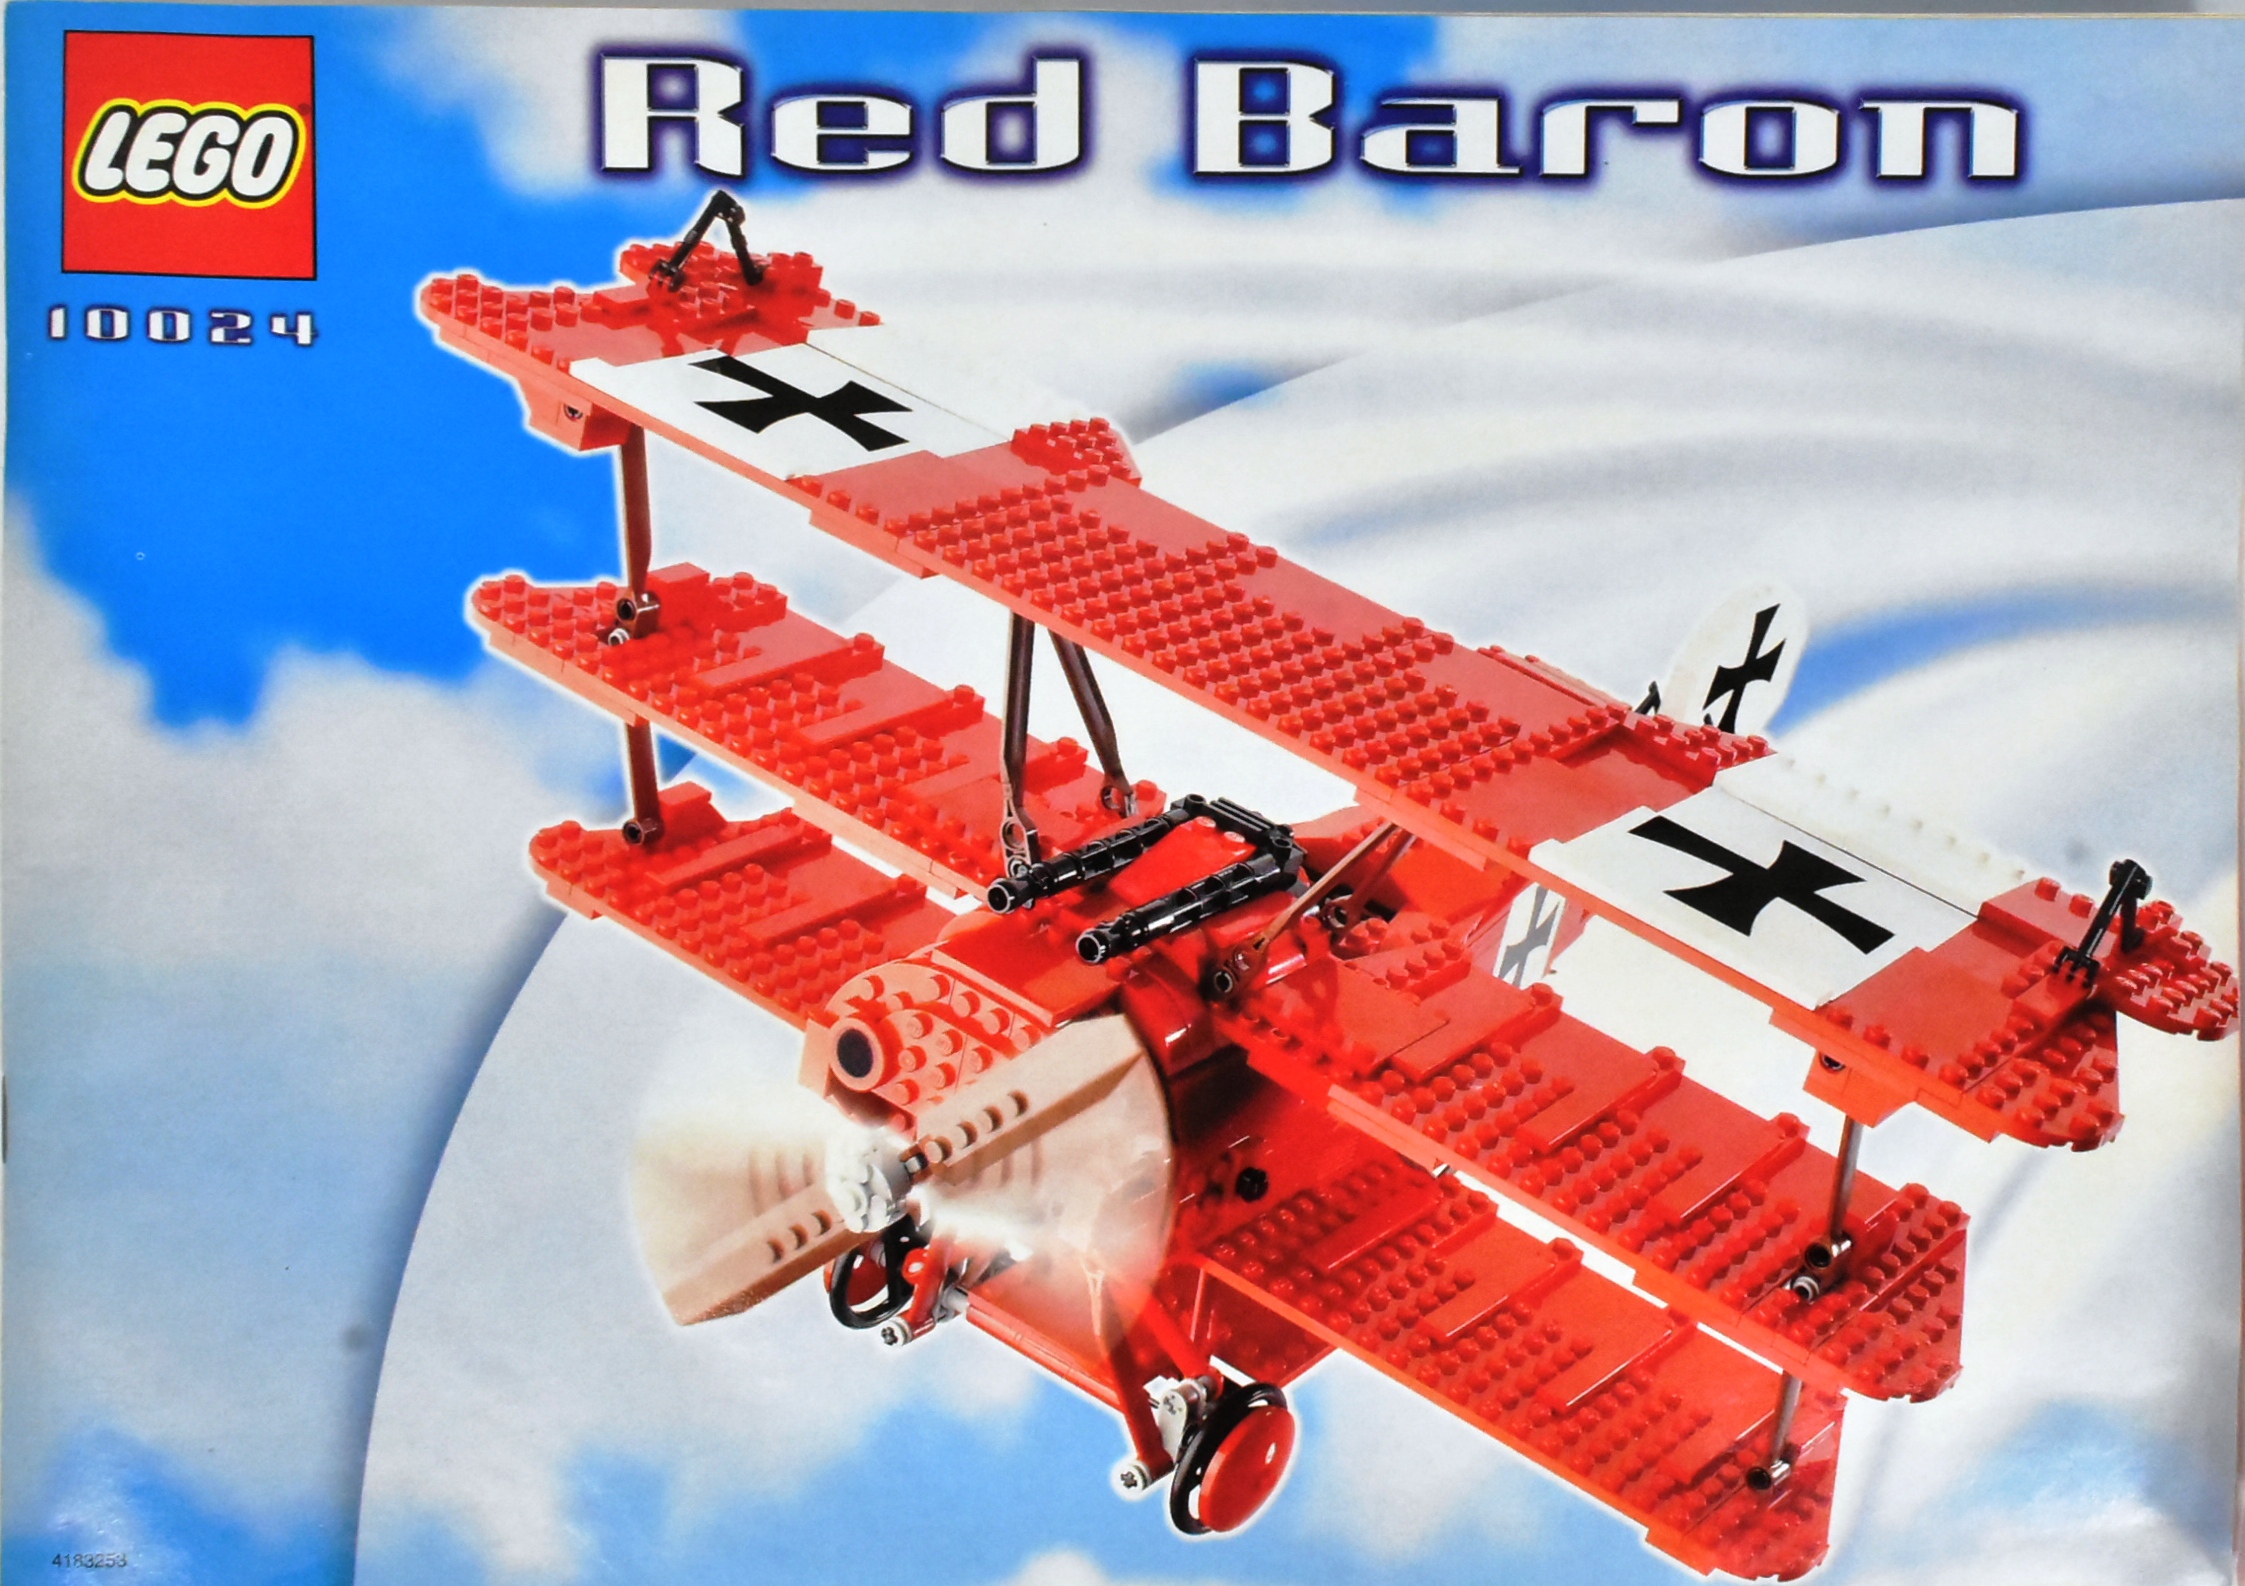 LEGO - SCULPTURES - 10024 - RED BARON - Image 5 of 5